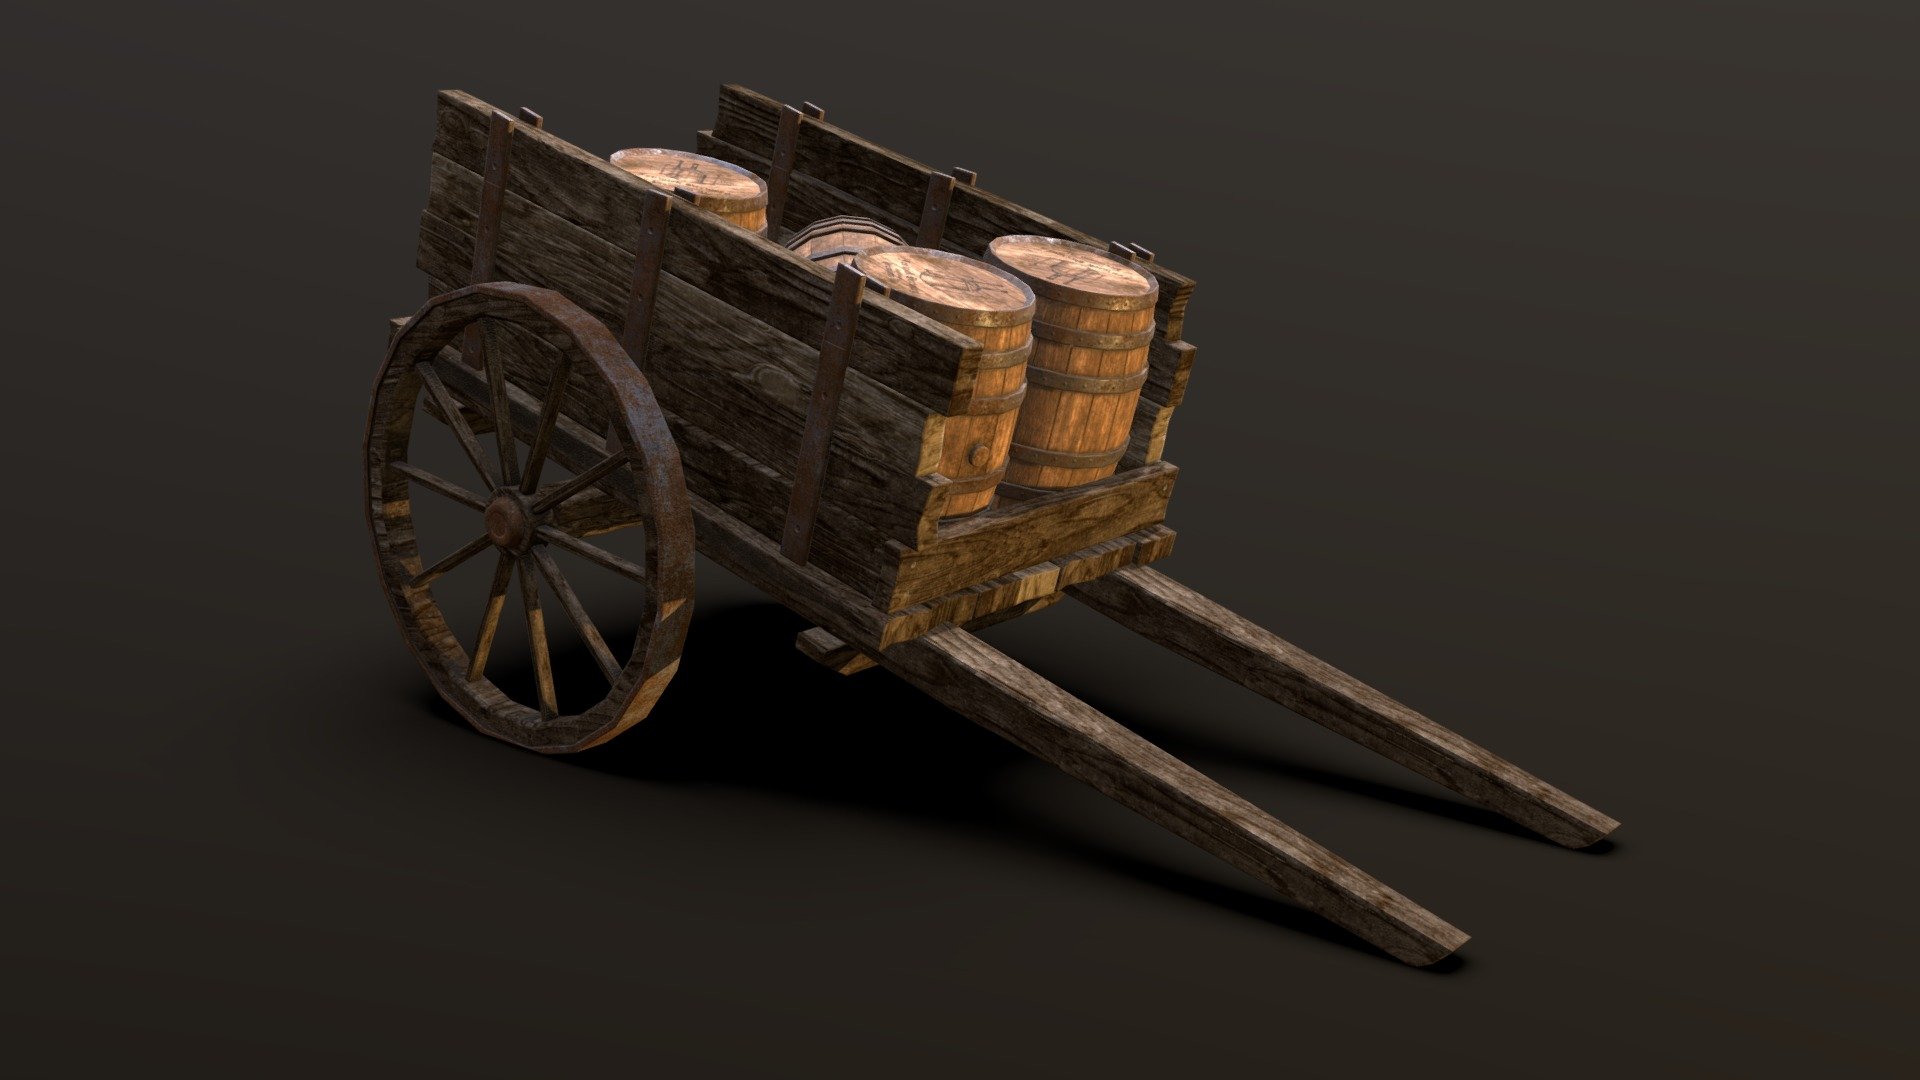 This is a wooden cart model that I have combined with the barrel model I made earlier in the medieval Inn environment project 3d model